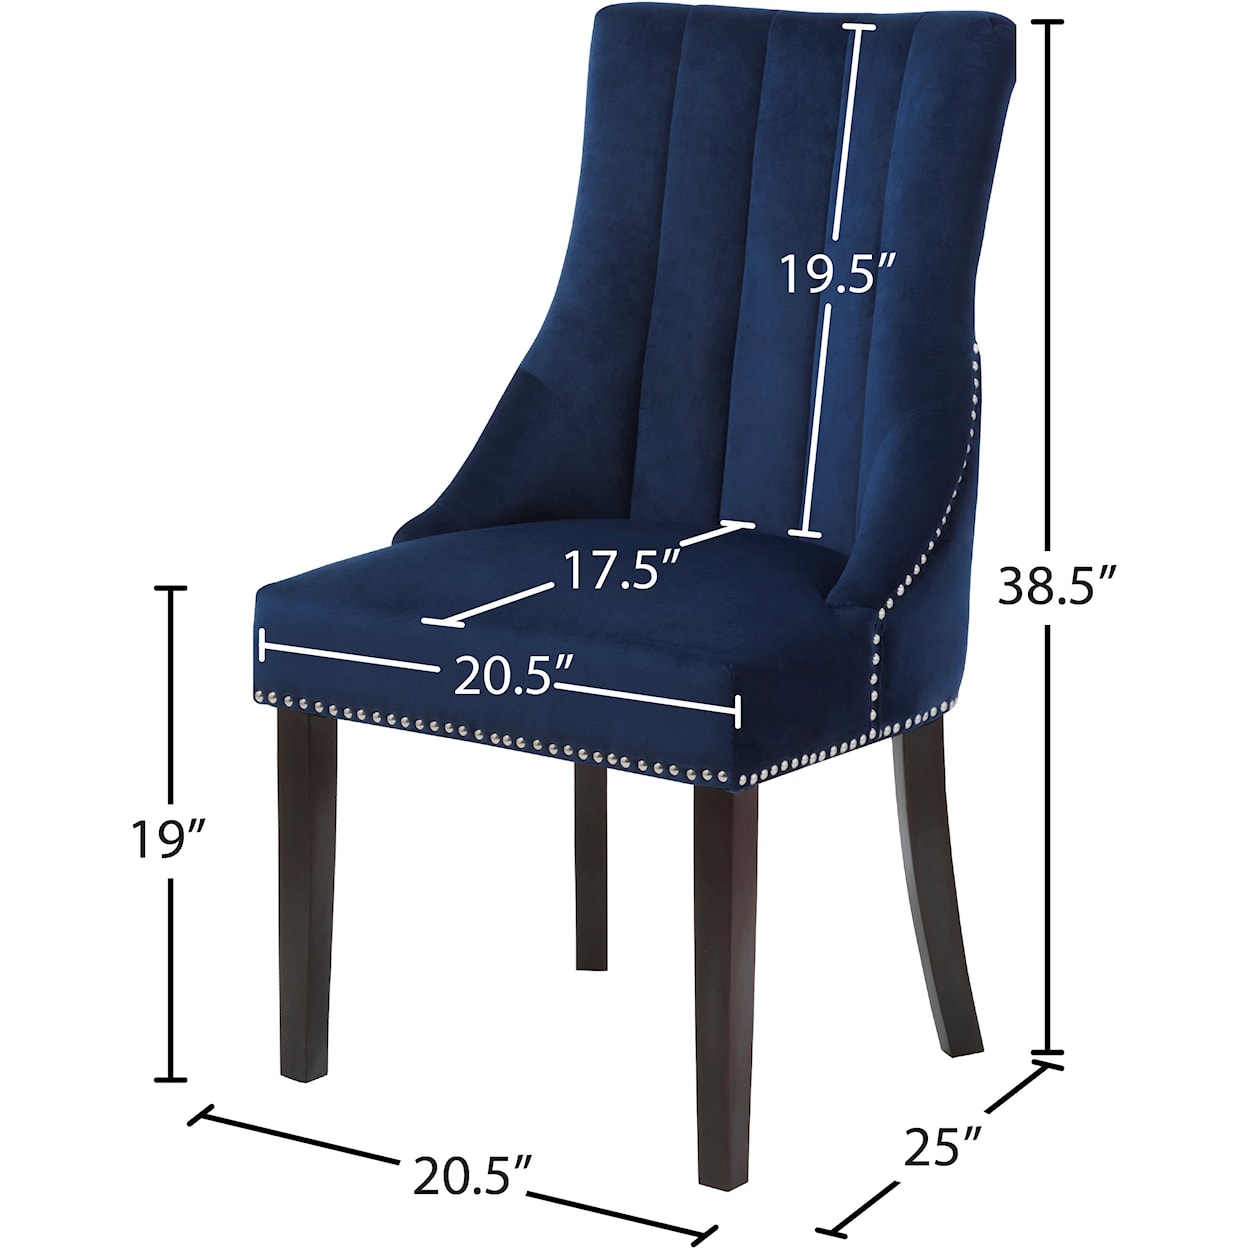 Meridian Furniture Oxford Dining Chair